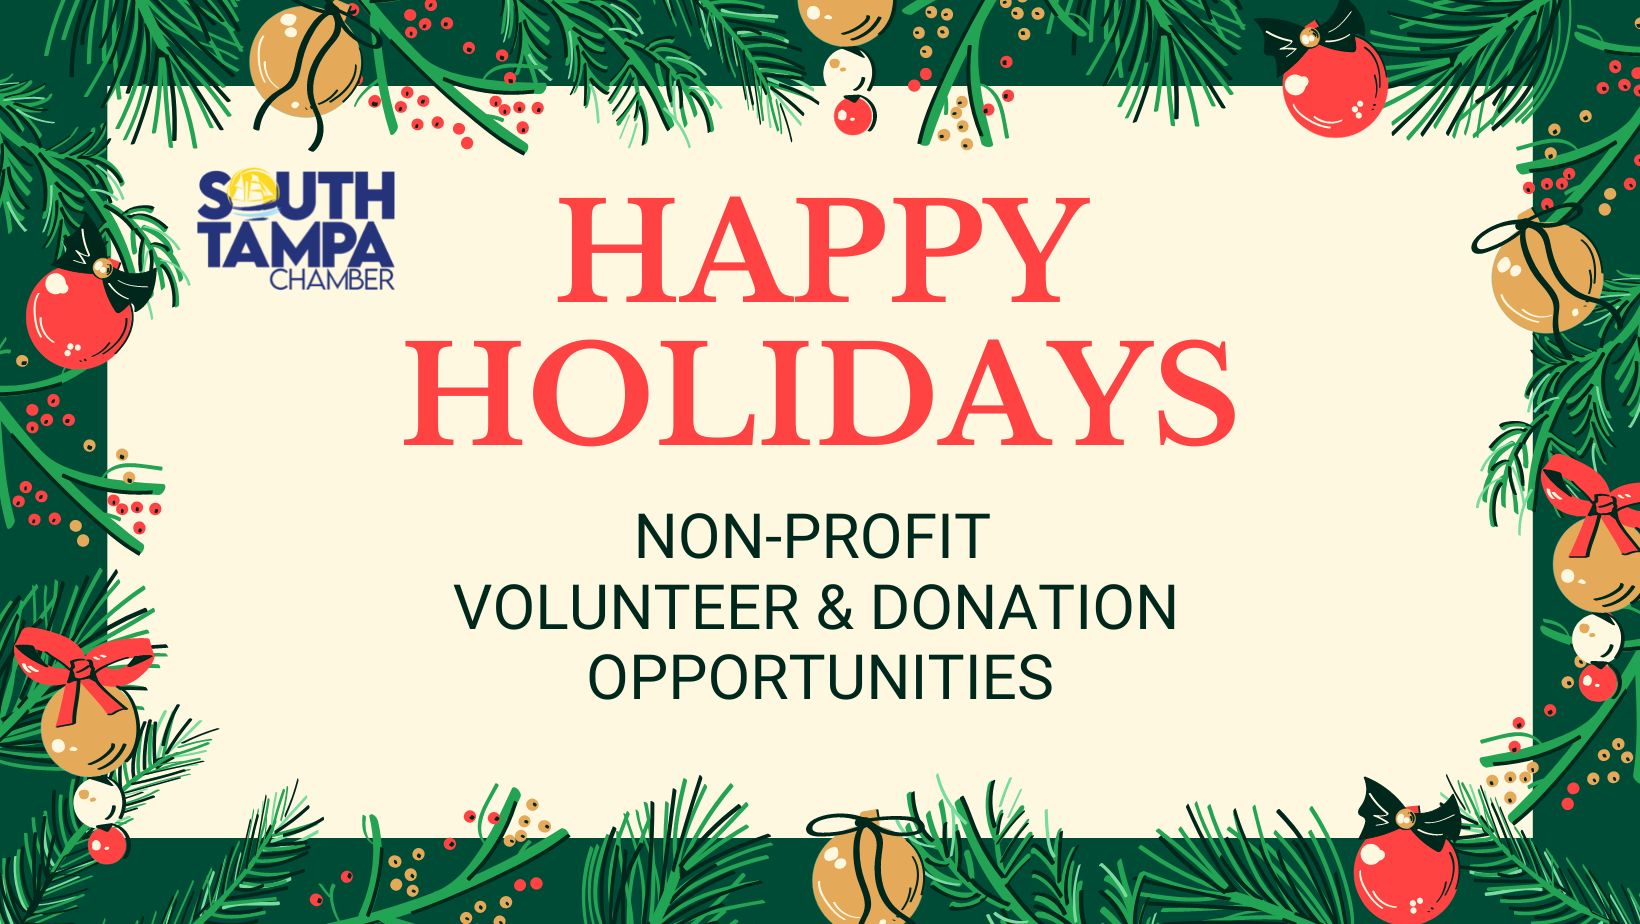 South Tampa Chamber Holiday Non-Profit Donation & Volunteer Opportunities!